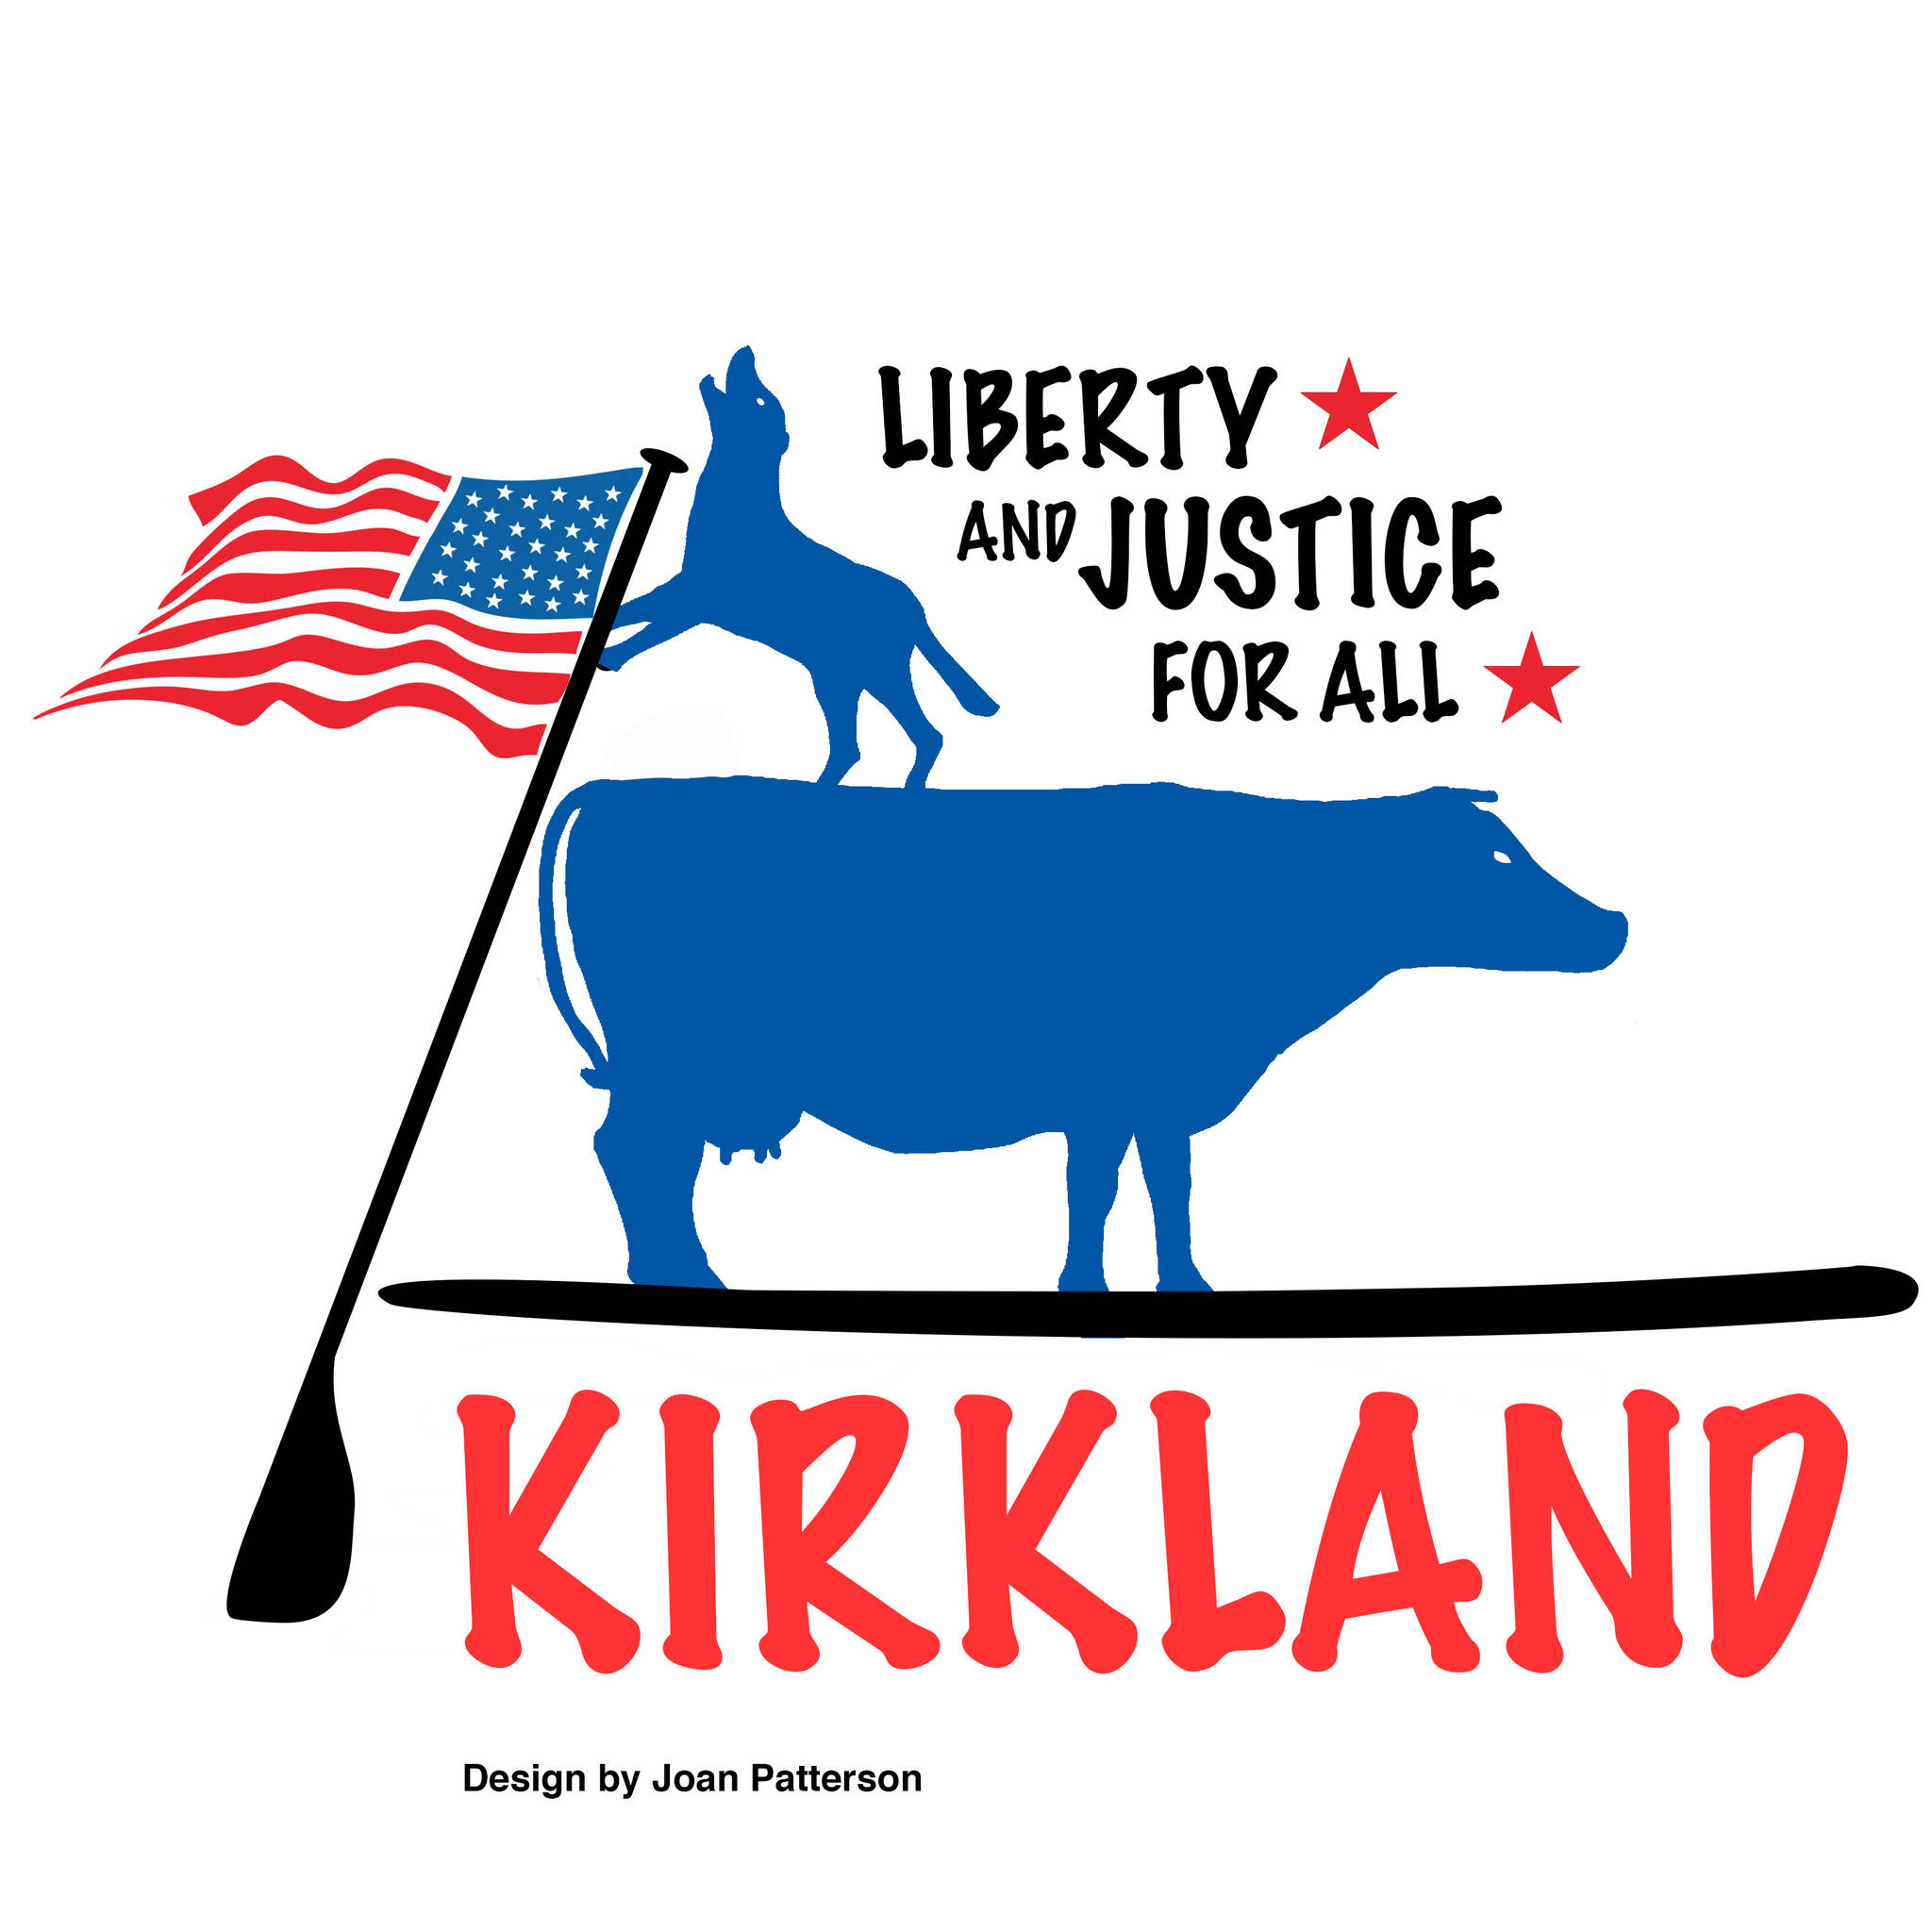 Joan Patterson had the winning design for the Kirkland Downtown Association’s Celebrate Kirkland T-shirt contest. T-shirts will be sold for $20 each while supplies last during the parade. Artwork courtesy of the Kirkland Downtown Association